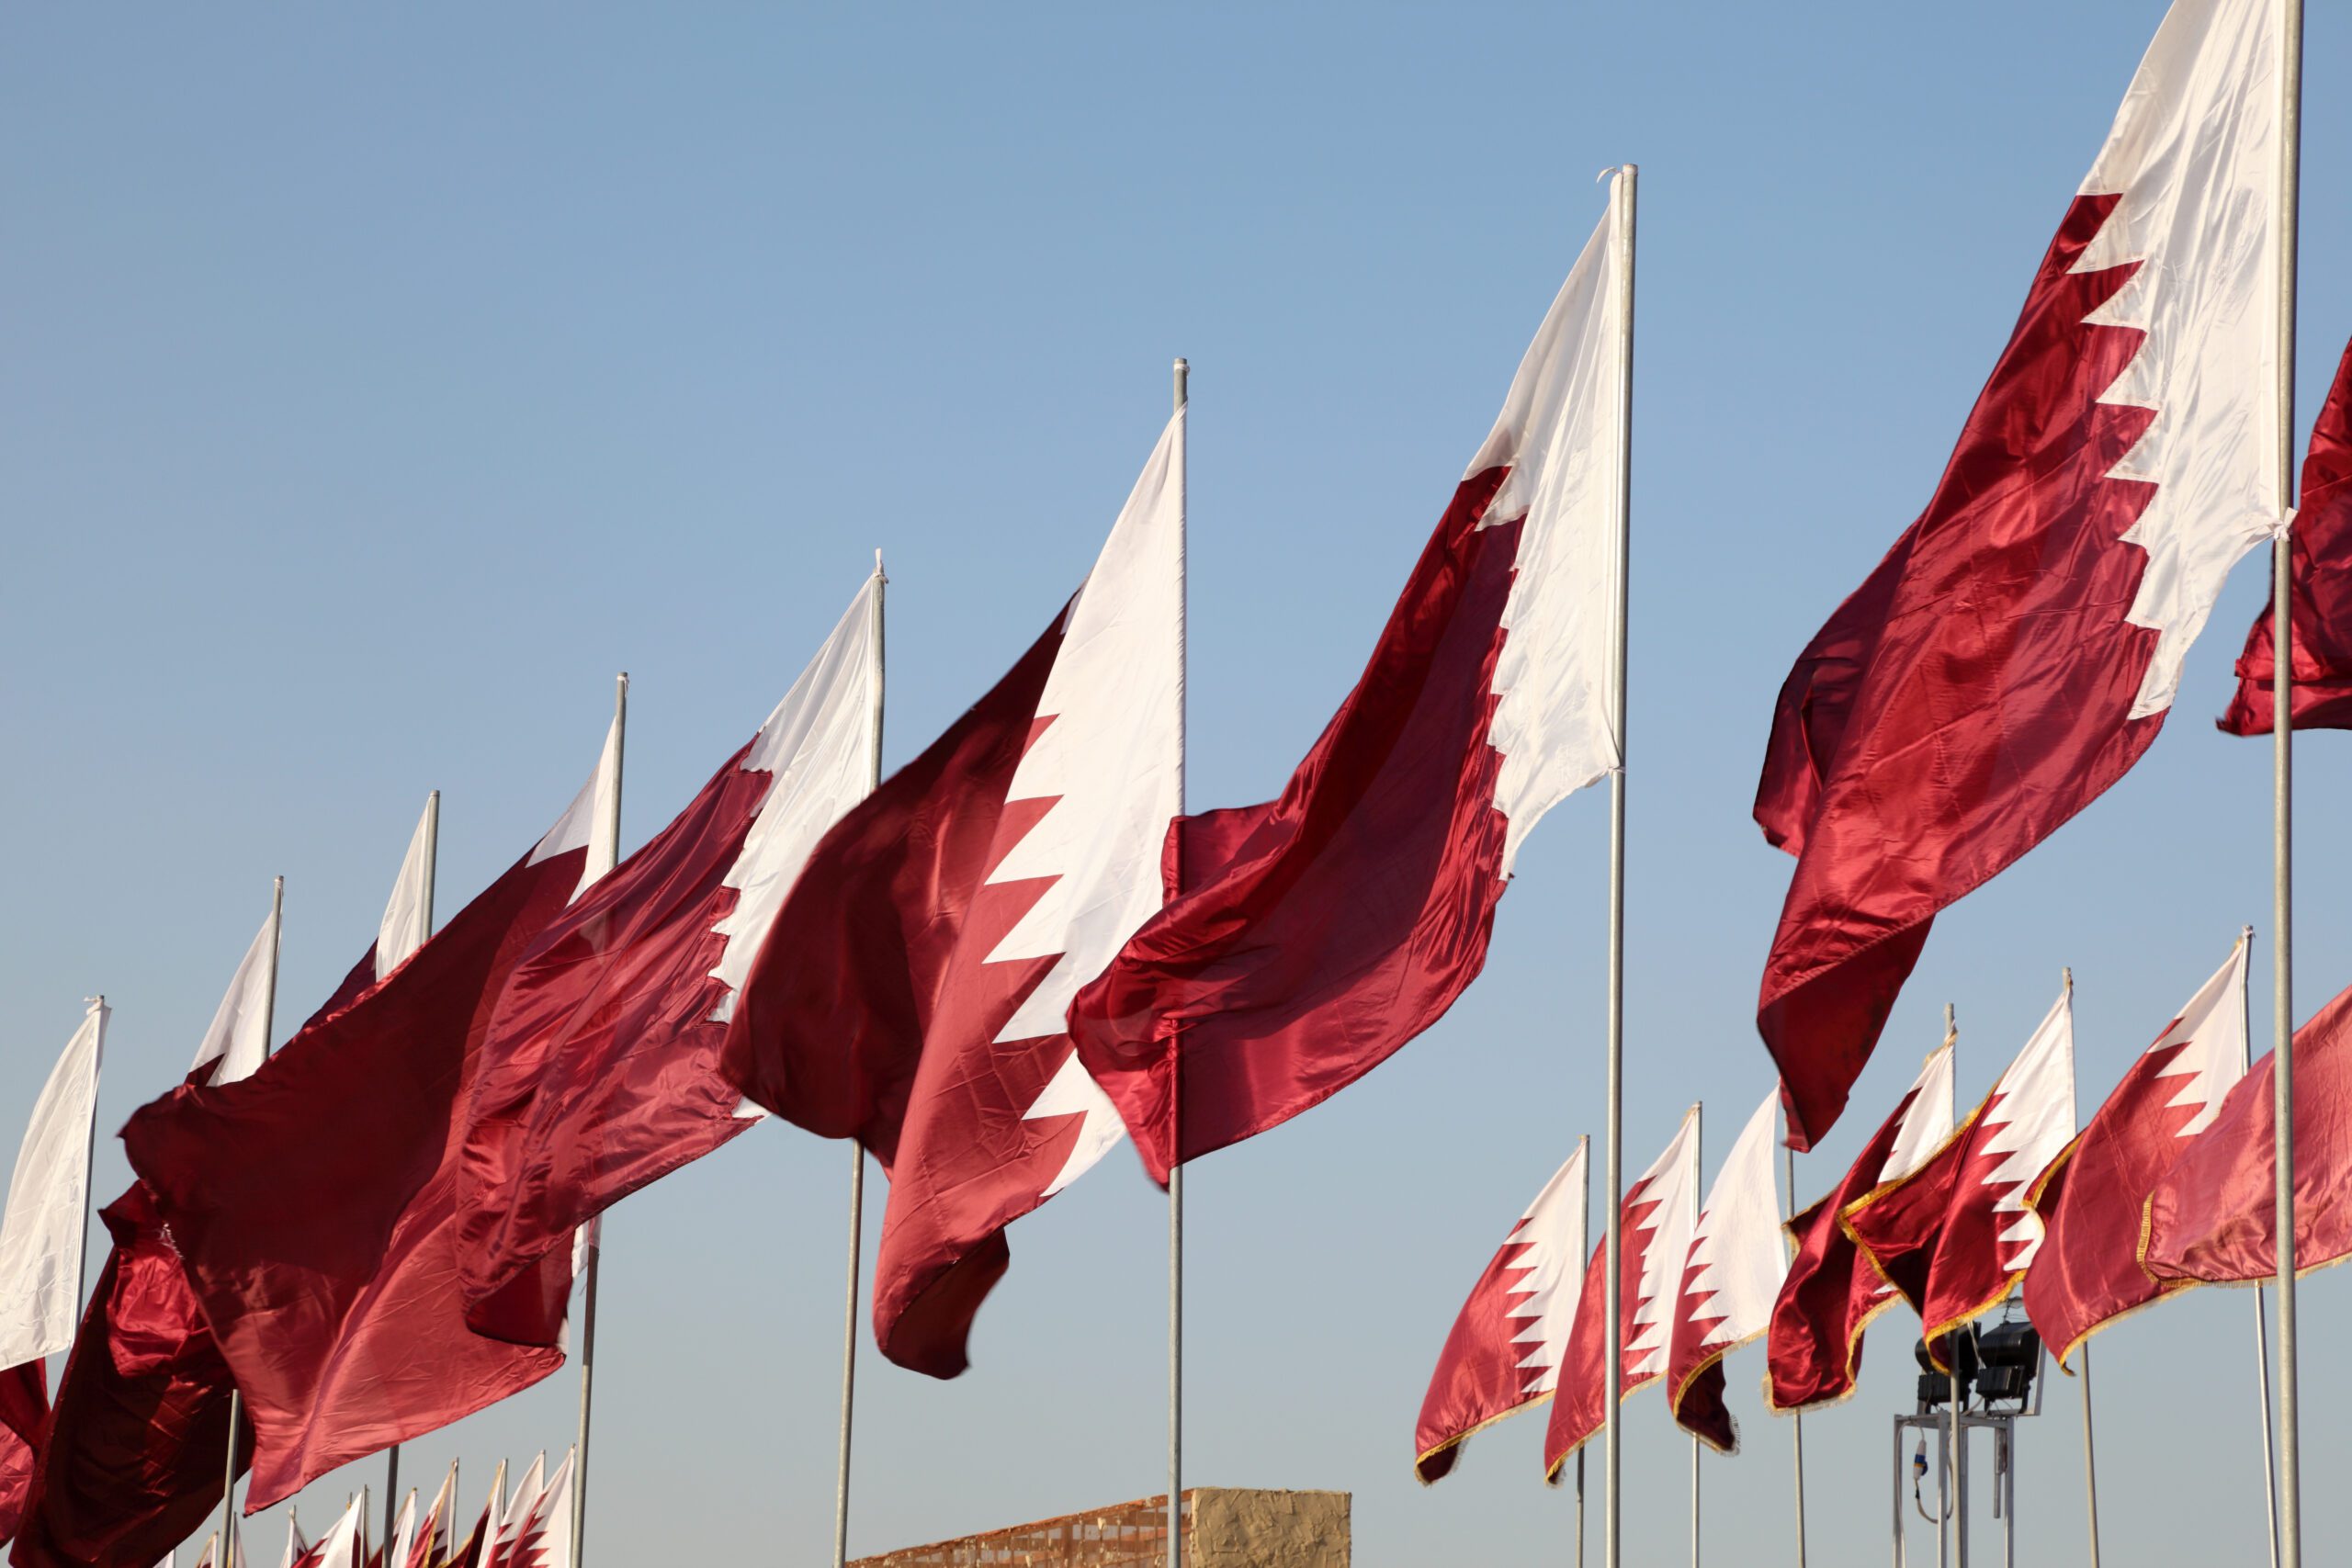 Qatar: How Much Social Progress is the Country Really Making?